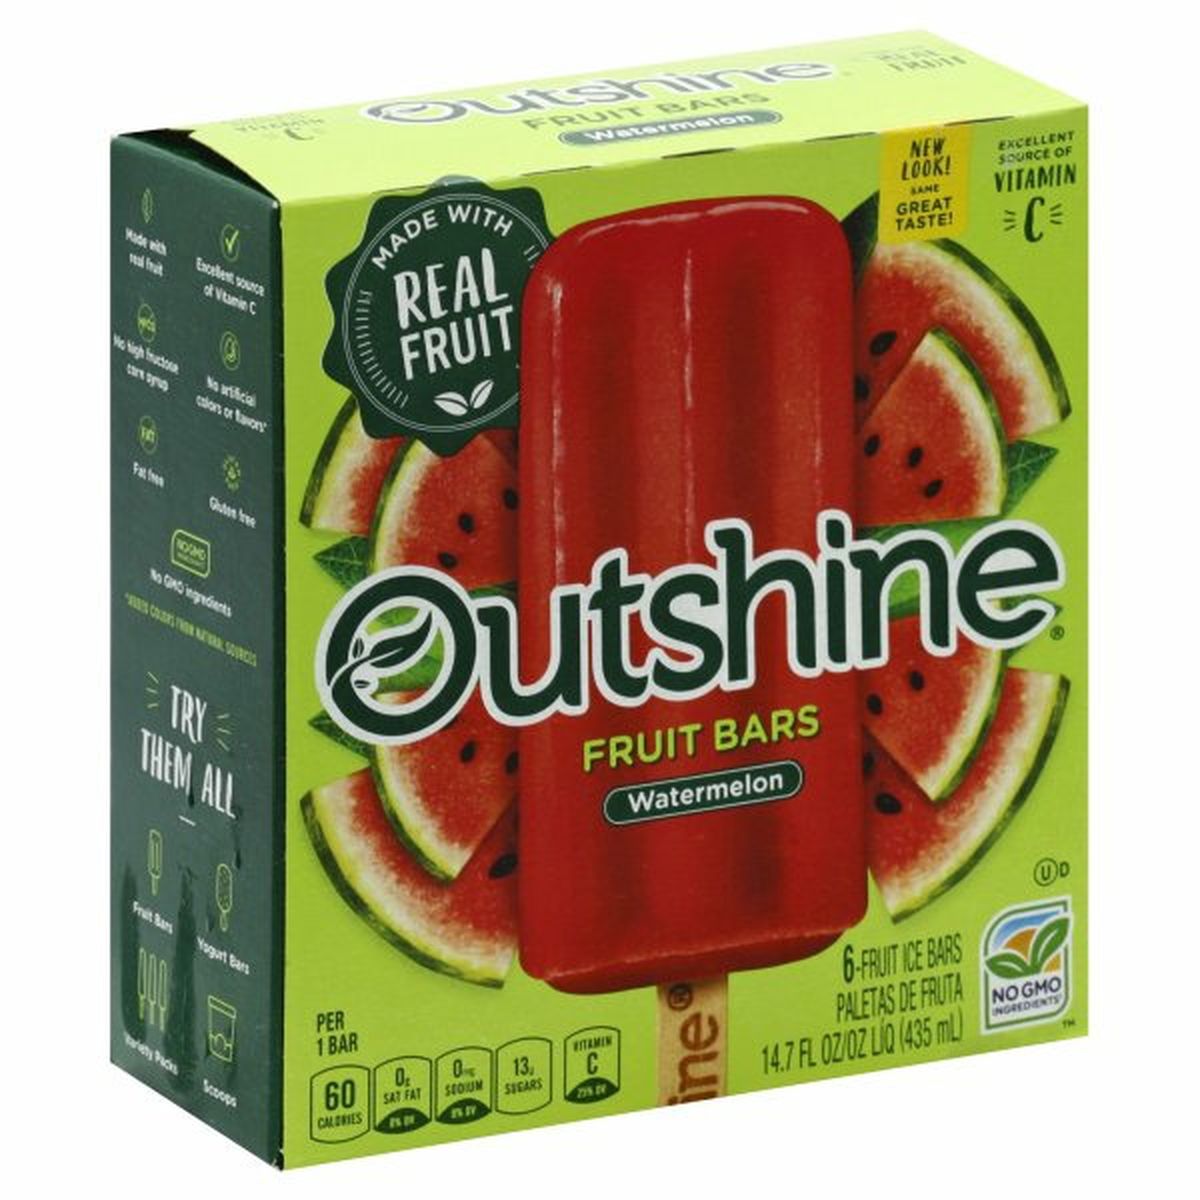 Calories in Outshine Fruit Bars, Watermelon